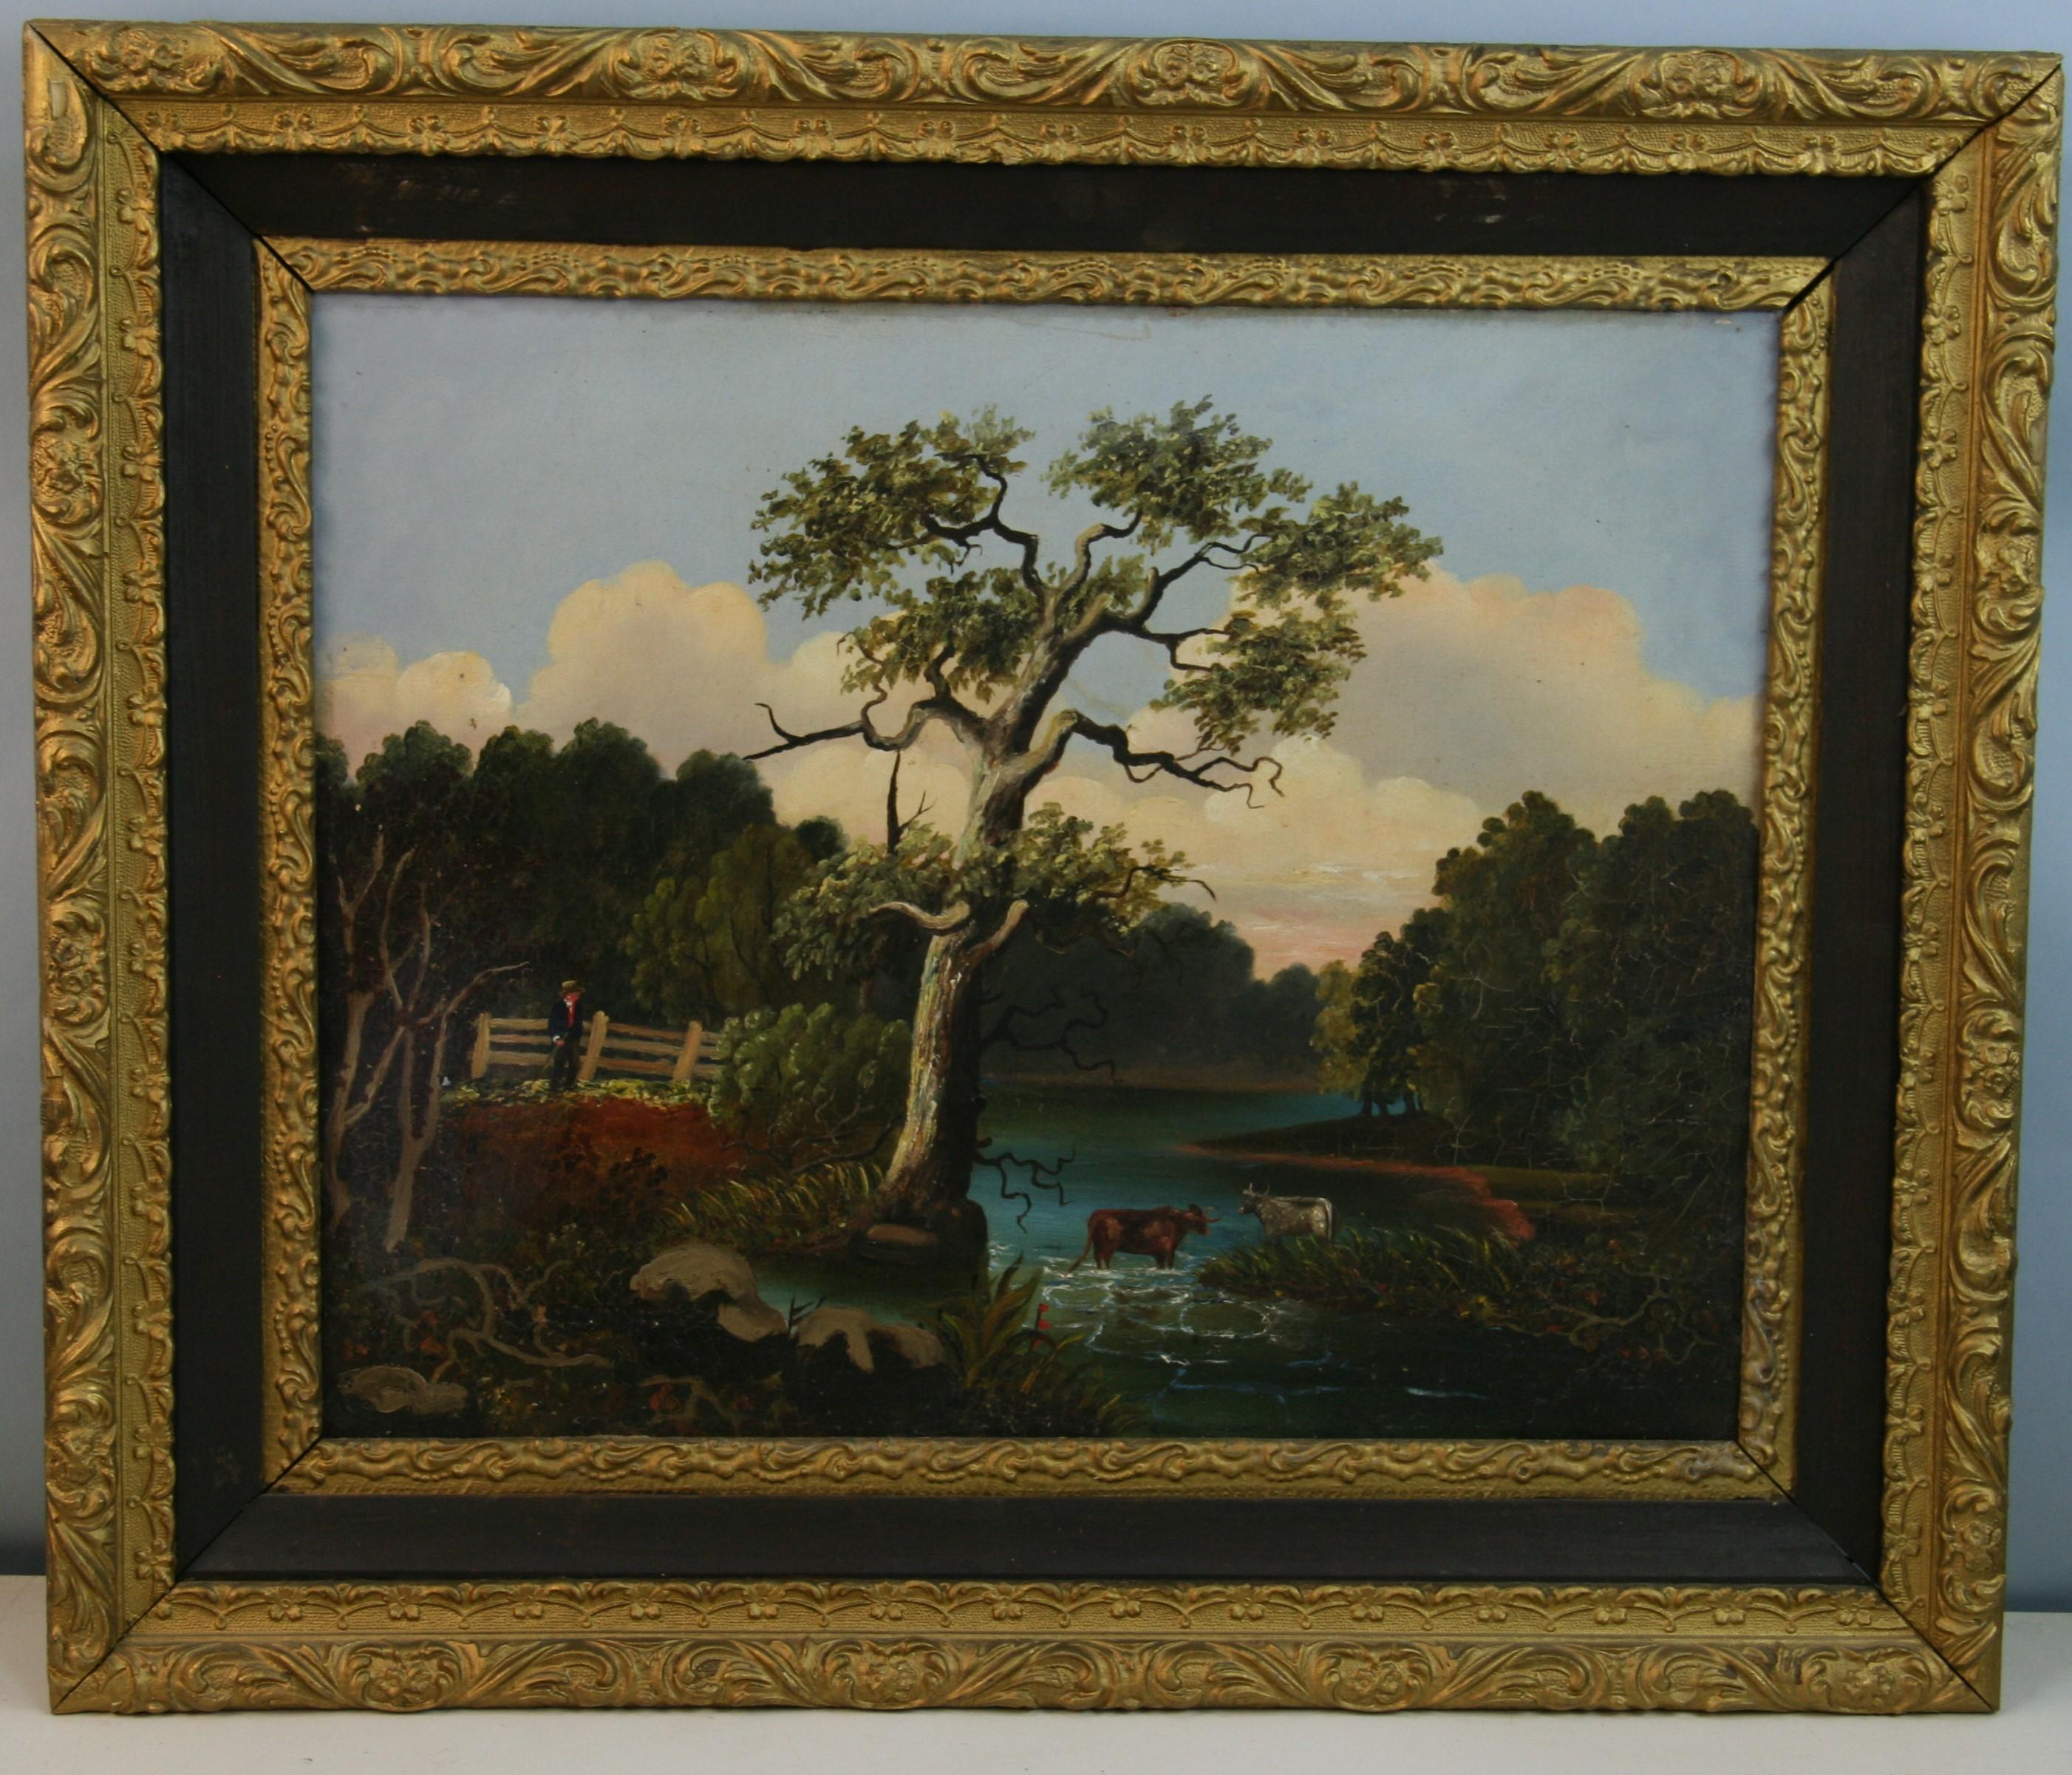 4026 Cows at rivers edge oil on canvas landscape painting
Set in a period frame
Image size 16x20